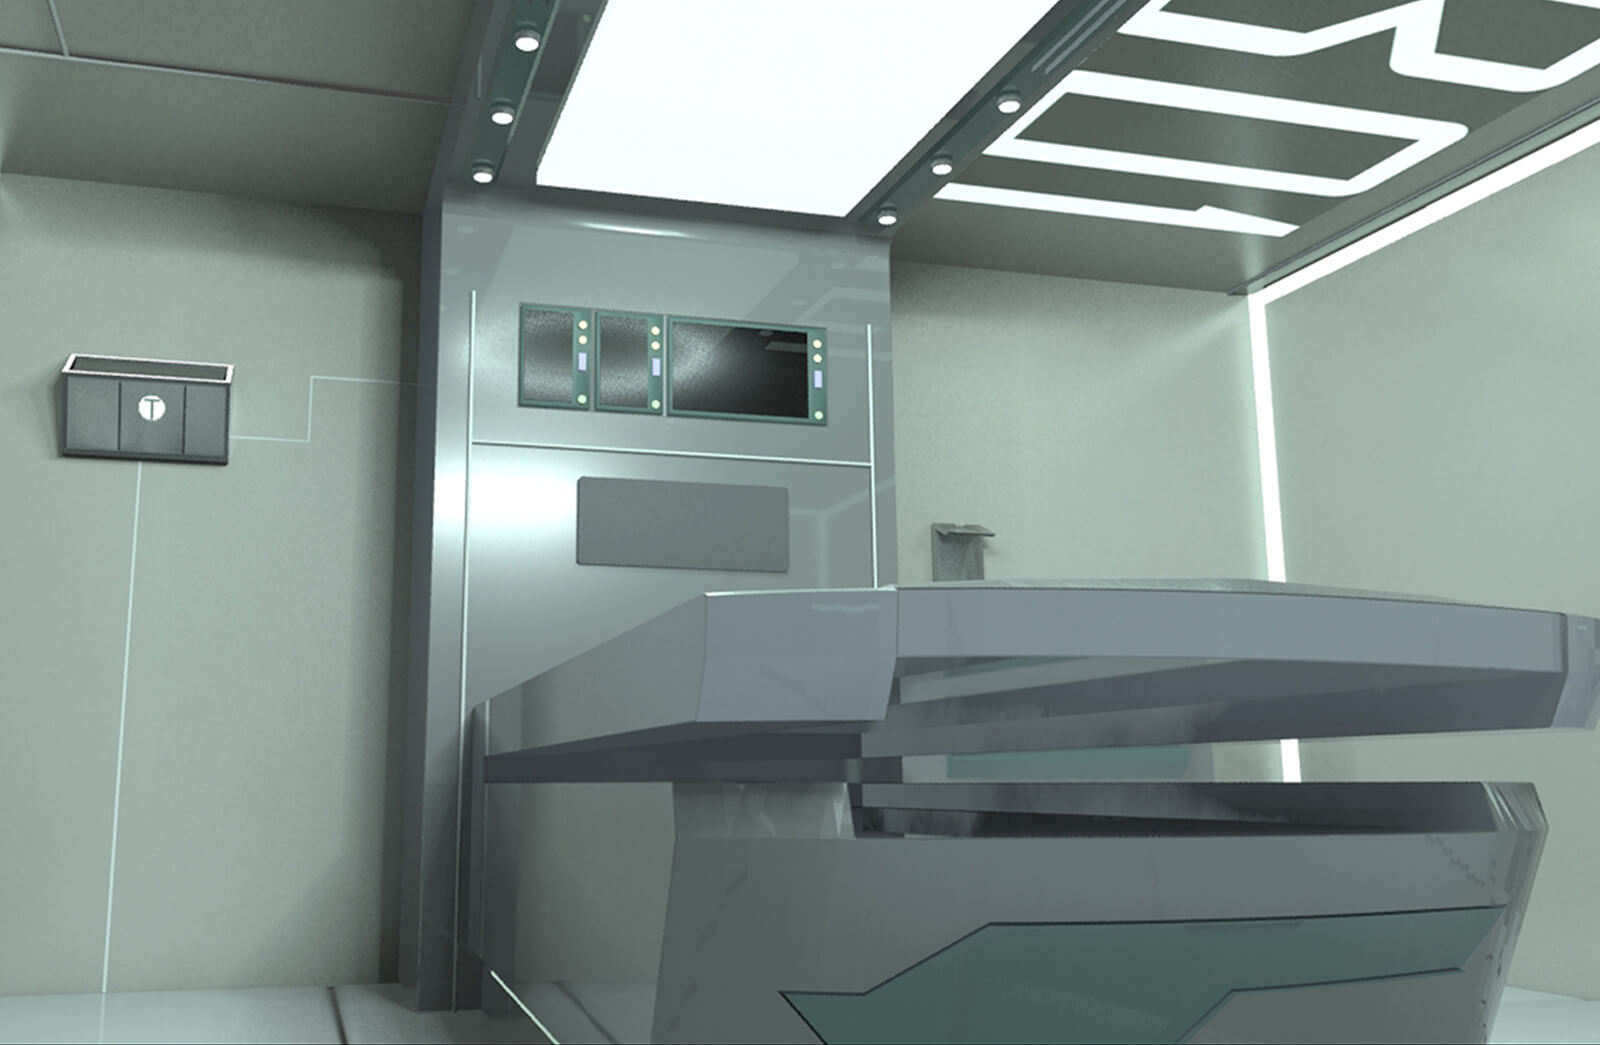 Render of a futuristic medical bay with an examining table, wall displays and lighting